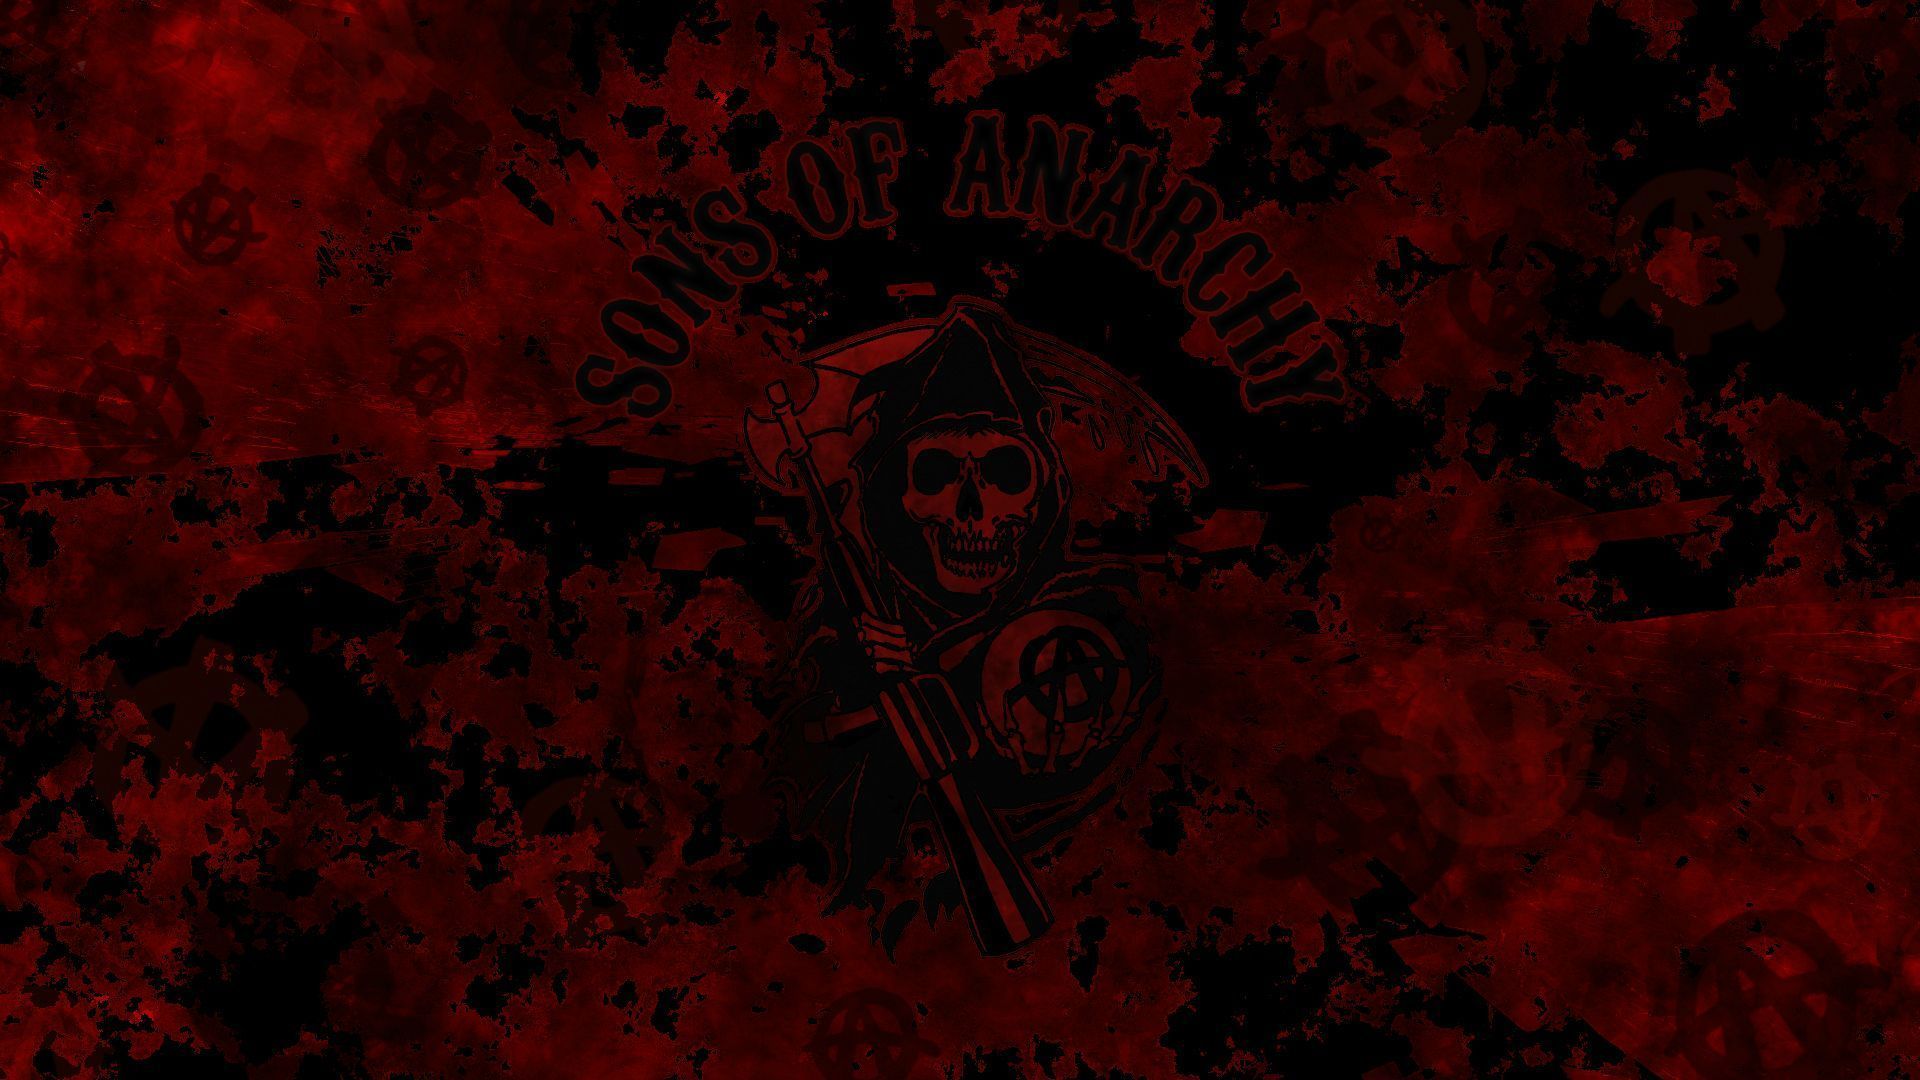 Quick SoA wallpaper I did while trying to re-hone my PS skills ...